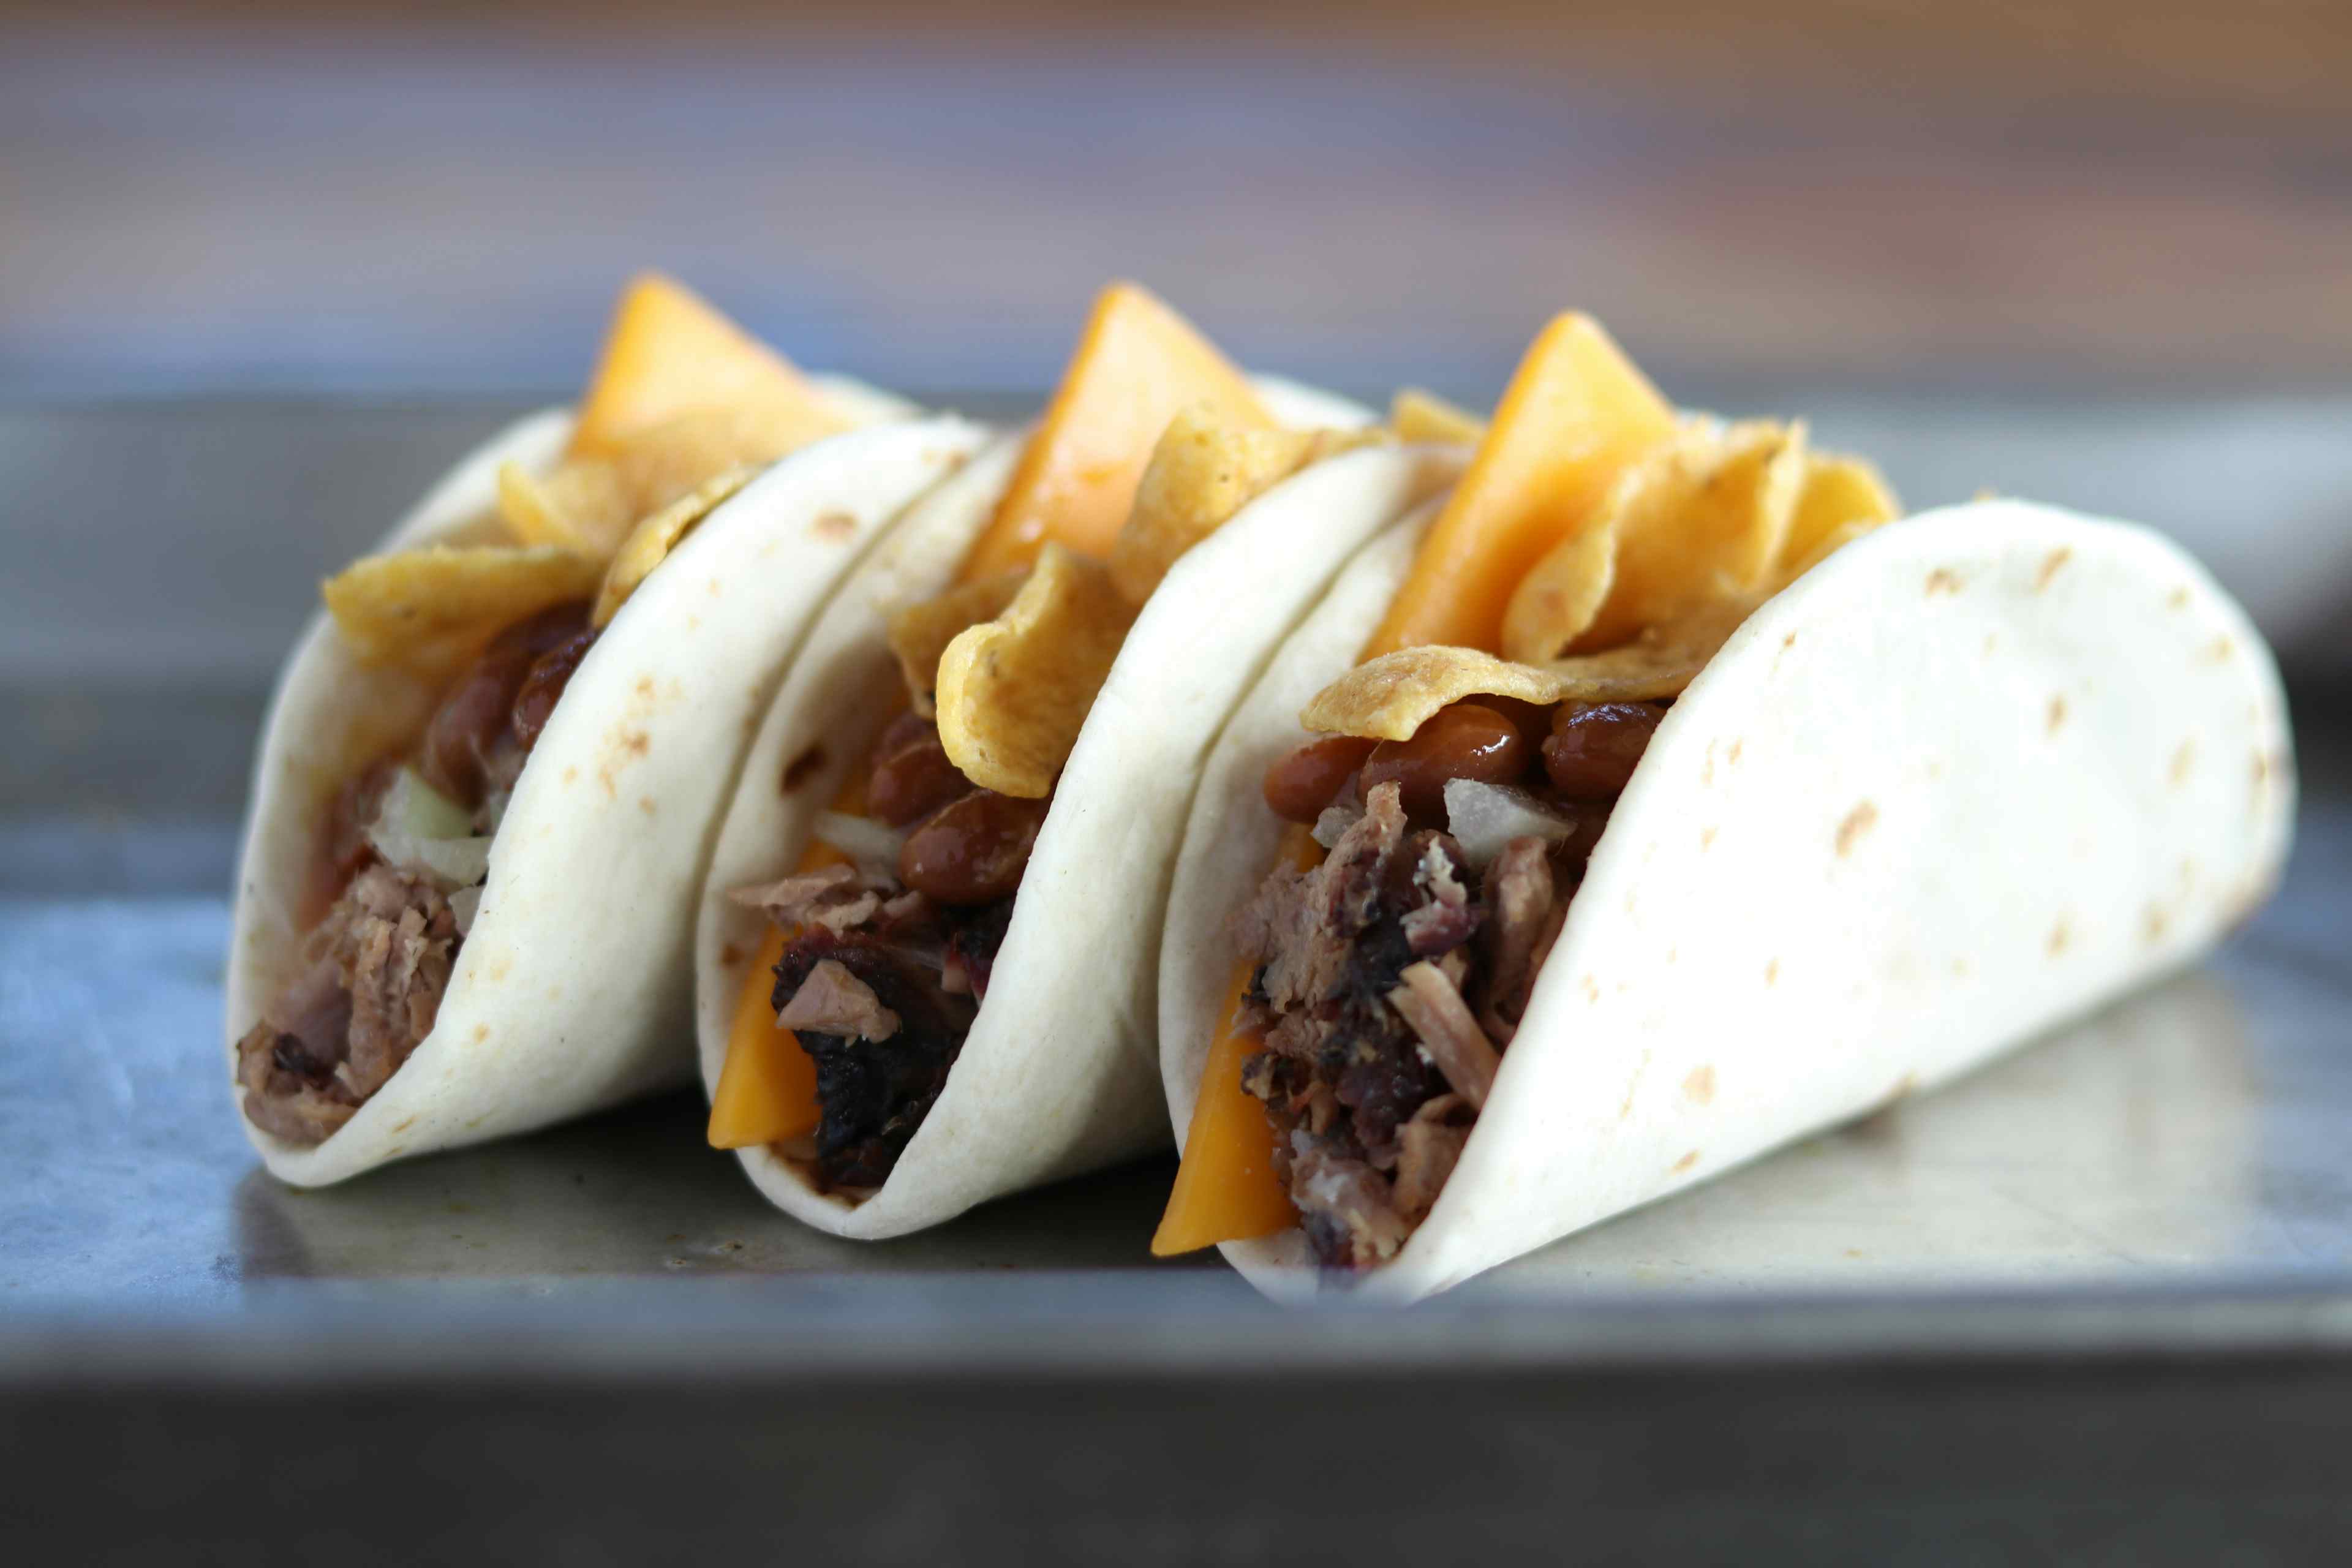 Dickey’s Barbecue Pit Introduces Their Newest Taco LTO: The Frito’s Pie Taco